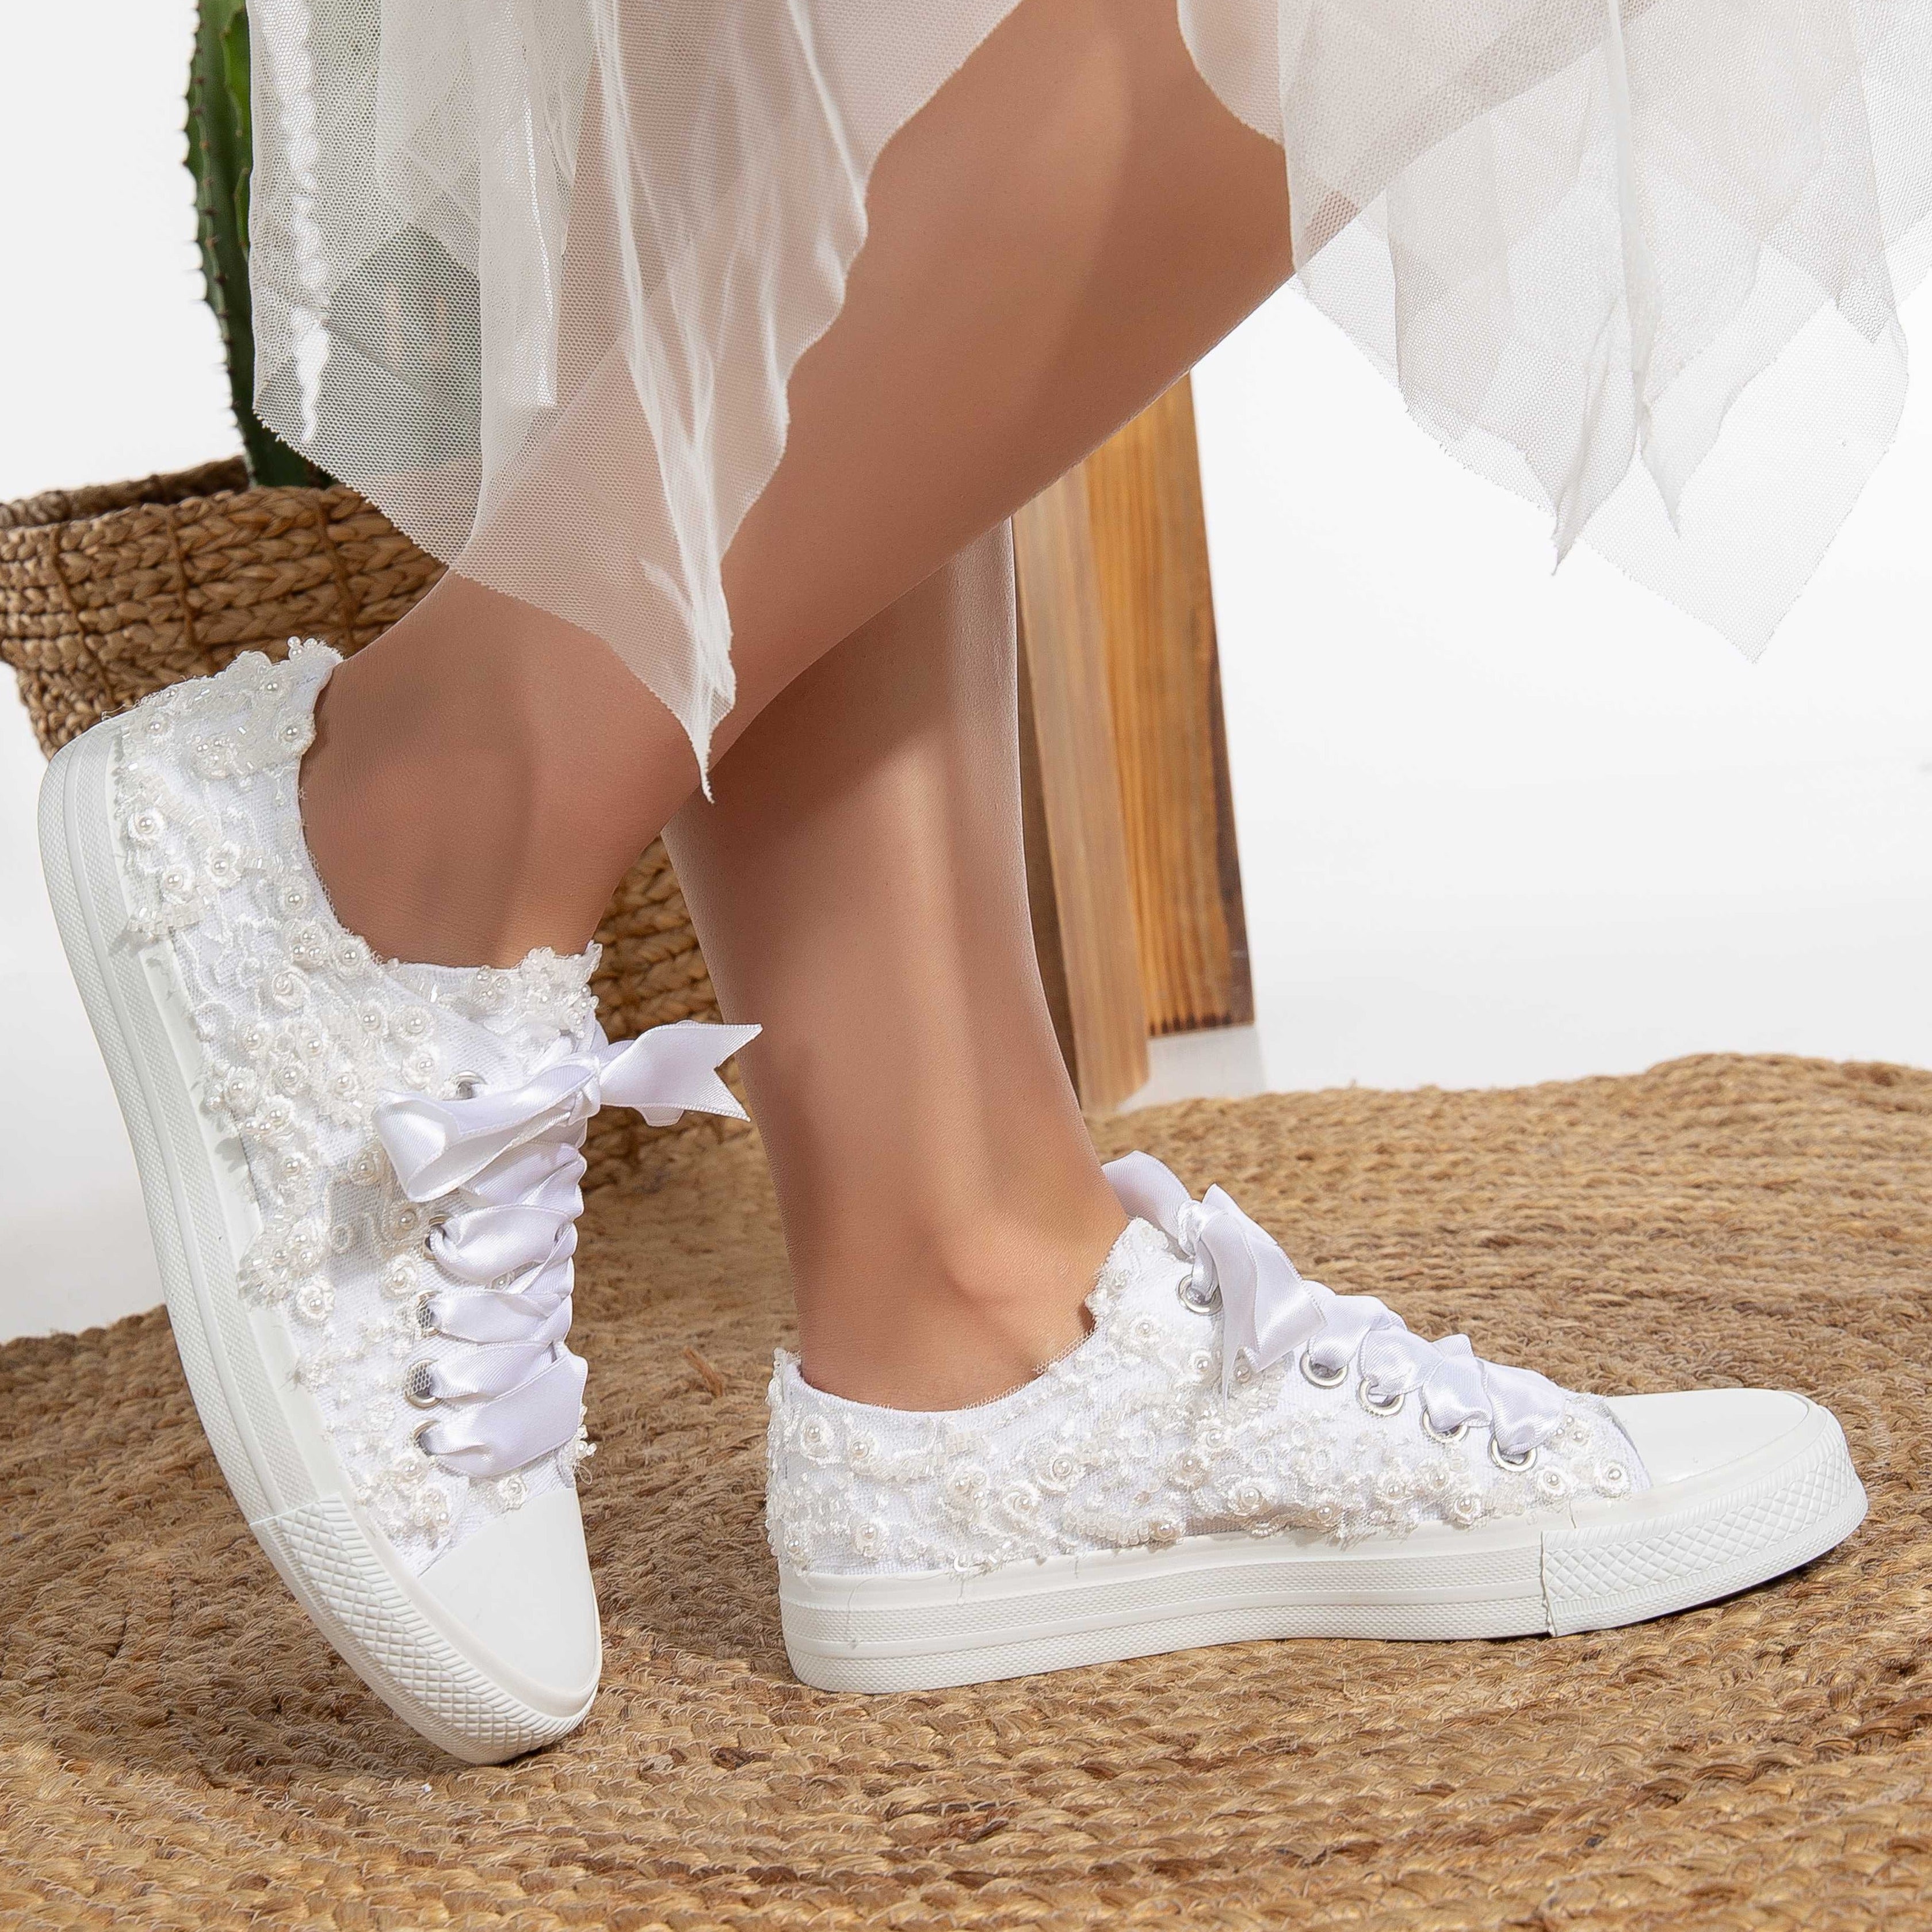 White Wedding Lace Sneakers, Bridal Lace Sneakers, Lace Wedding Sneakers, White Bridal Sneakers, Wedding Sneakers with Lace, Lace Bridal Shoes, Comfortable Wedding Sneakers, White Lace Bridal Footwear, Lace Sneakers for Brides, Elegant Wedding Sneakers